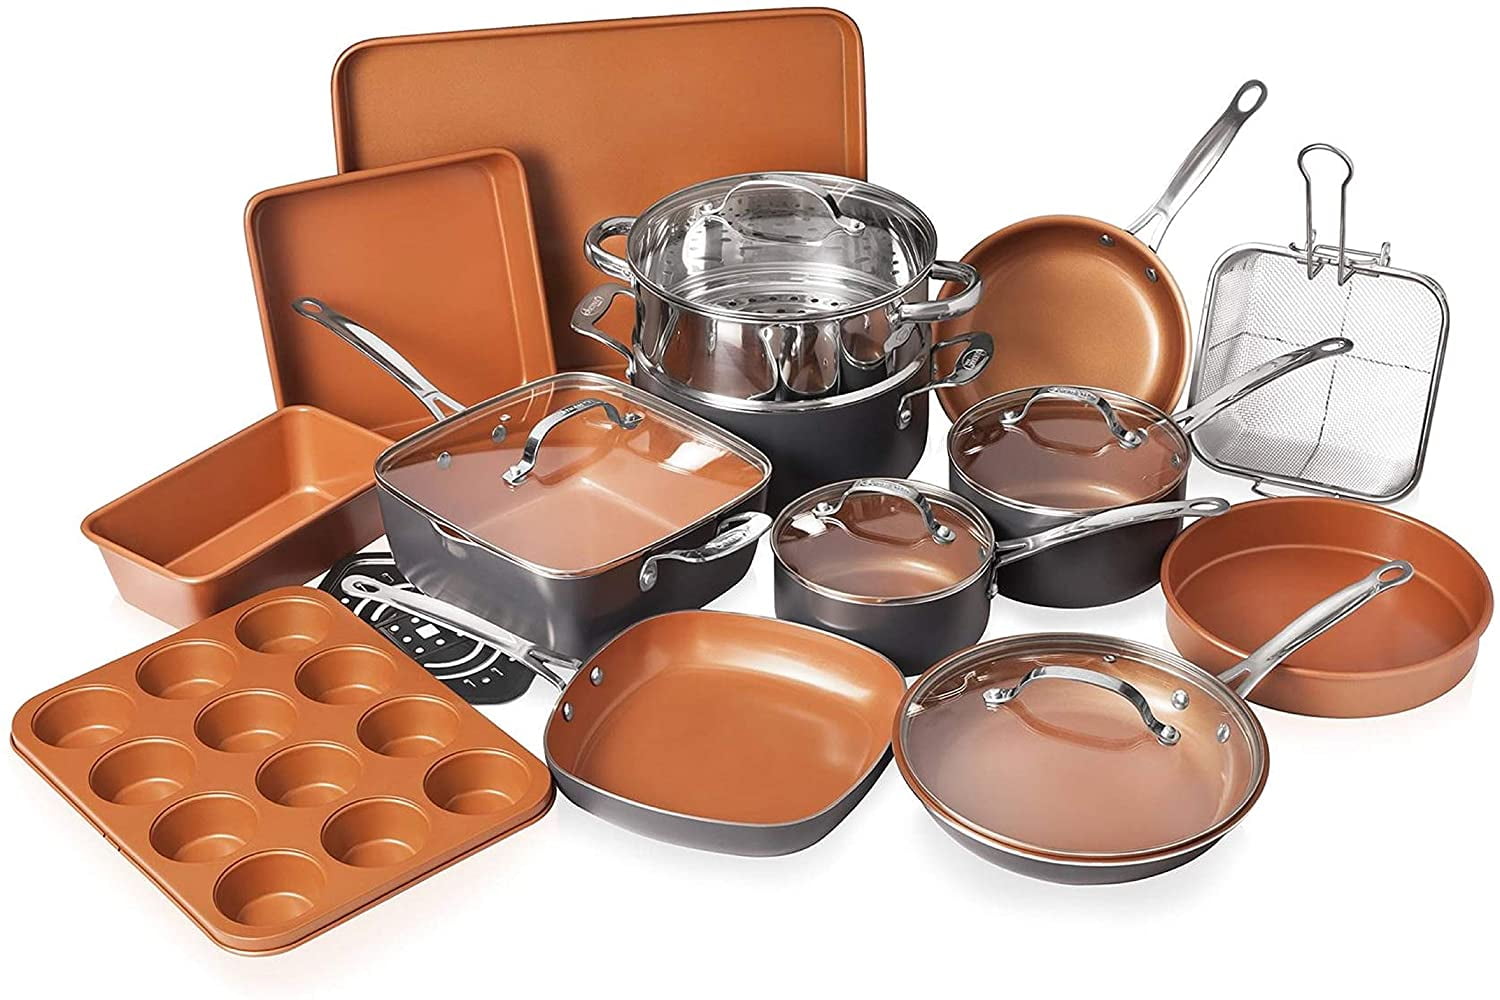 Gotham Steel Copper Nonstick Bakeware Cookie Sheets & Much More! Baking Pans 